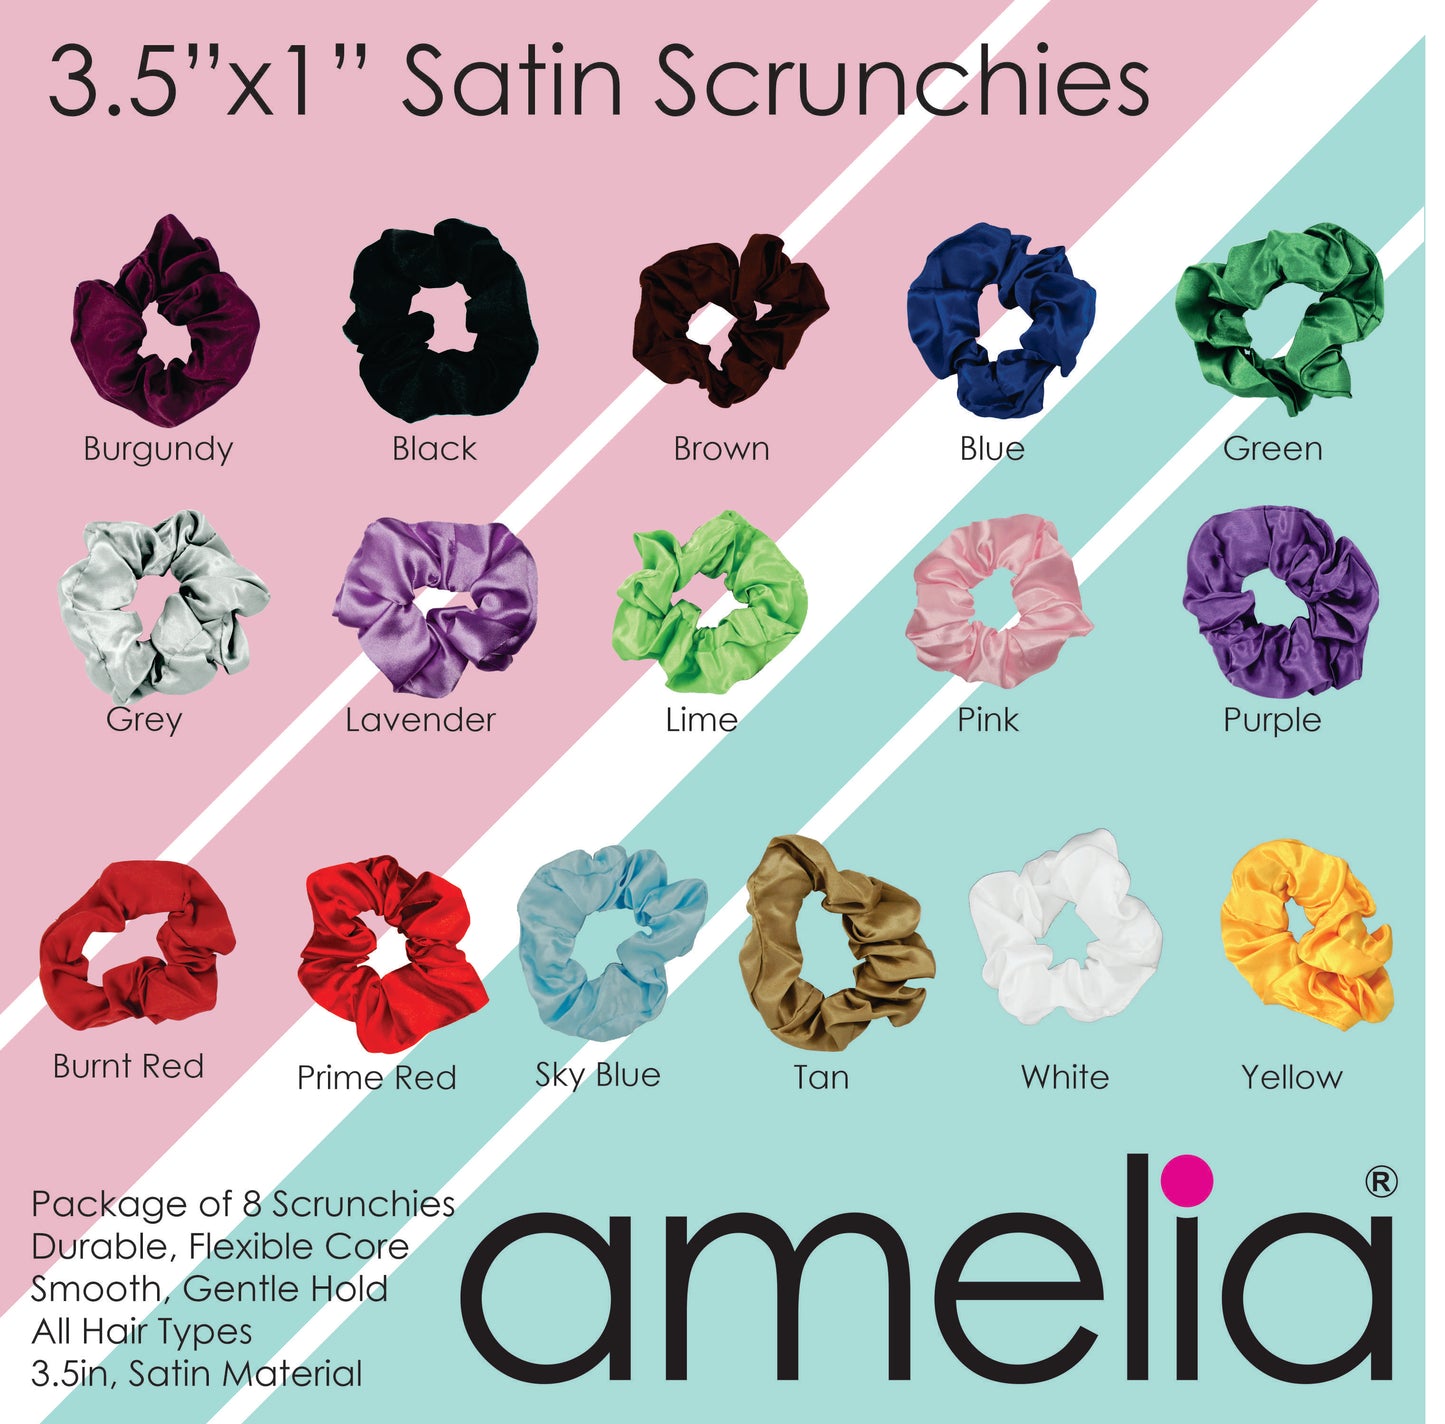 Amelia Beauty Products, Rainbow Colors Satin Scrunchies, 3.5in Diameter, Gentle on Hair, Strong Hold, No Snag, No Dents or Creases. 8 Pack